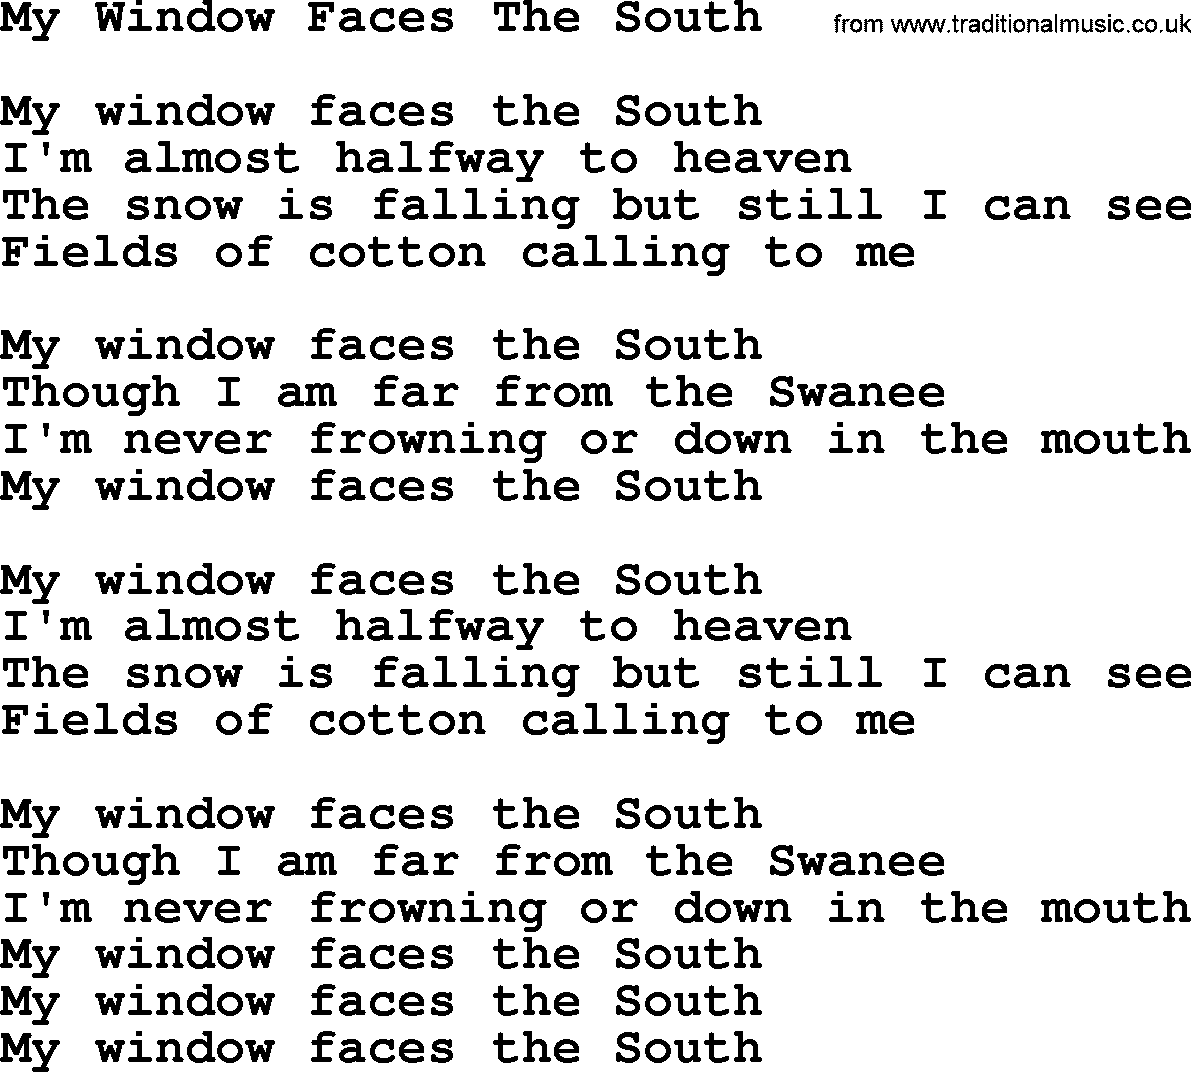 Willie Nelson song: My Window Faces The South lyrics